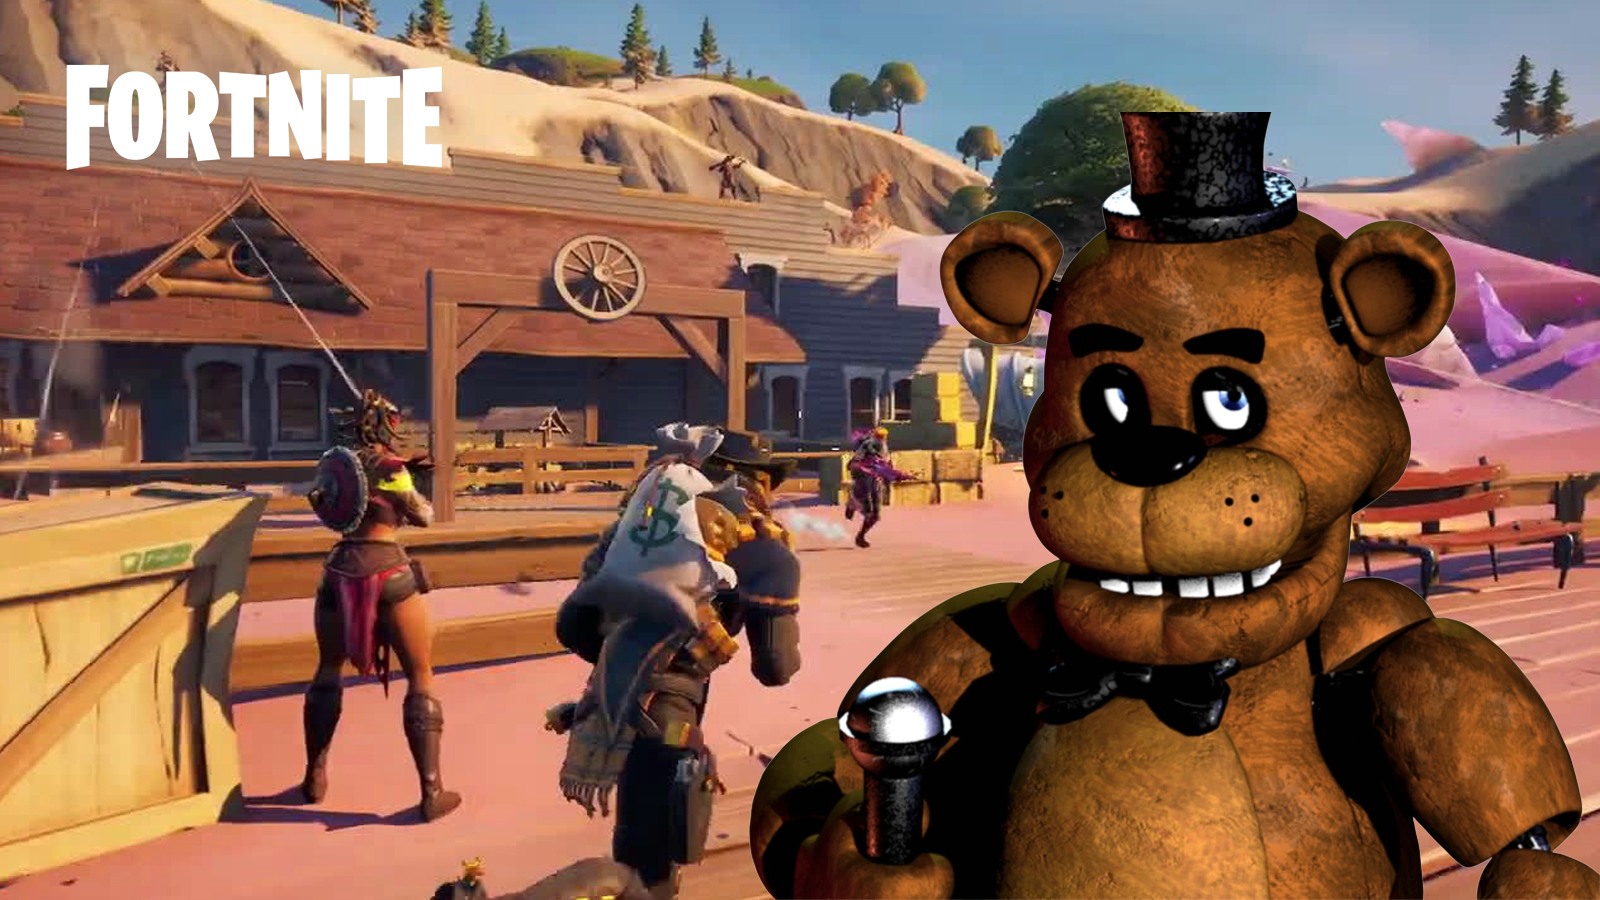 JonnyBlox on X: FNaF News: It appears FNaF characters have once again been  spotted in surveys posted by Epic Games to garner interest for possible  future collabs with Fortnite. SB and FNaF